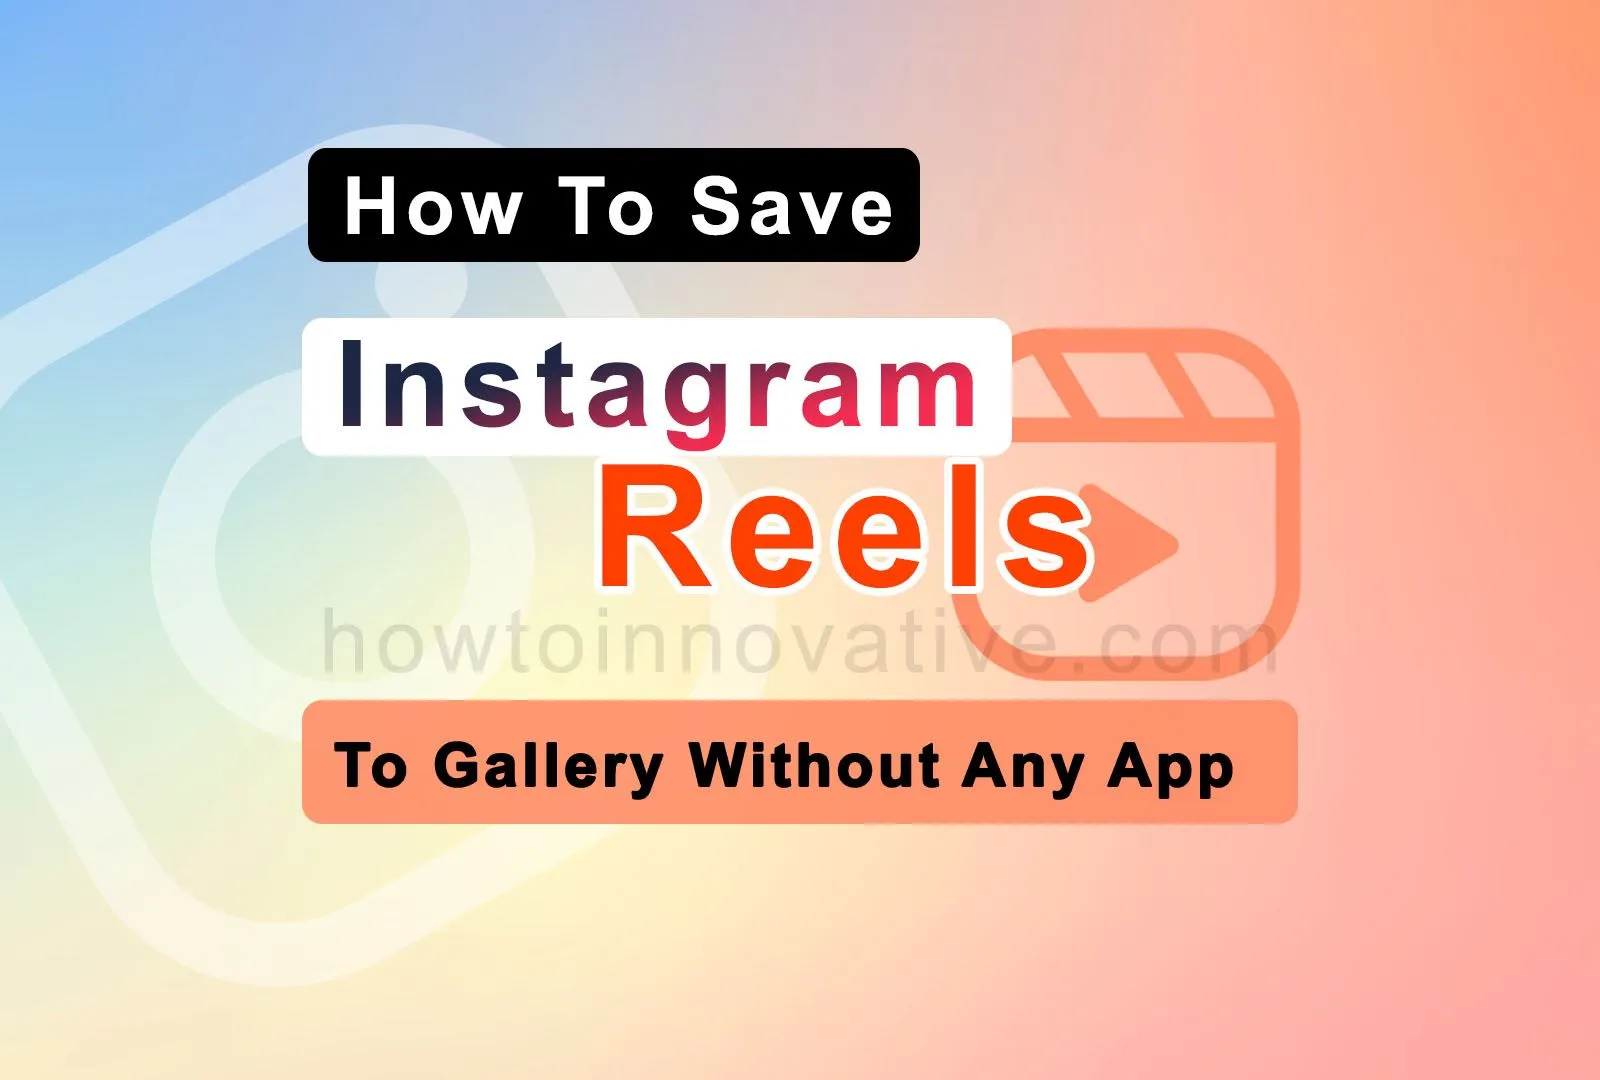 How To Save Instagram Reels To Gallery Without Any App